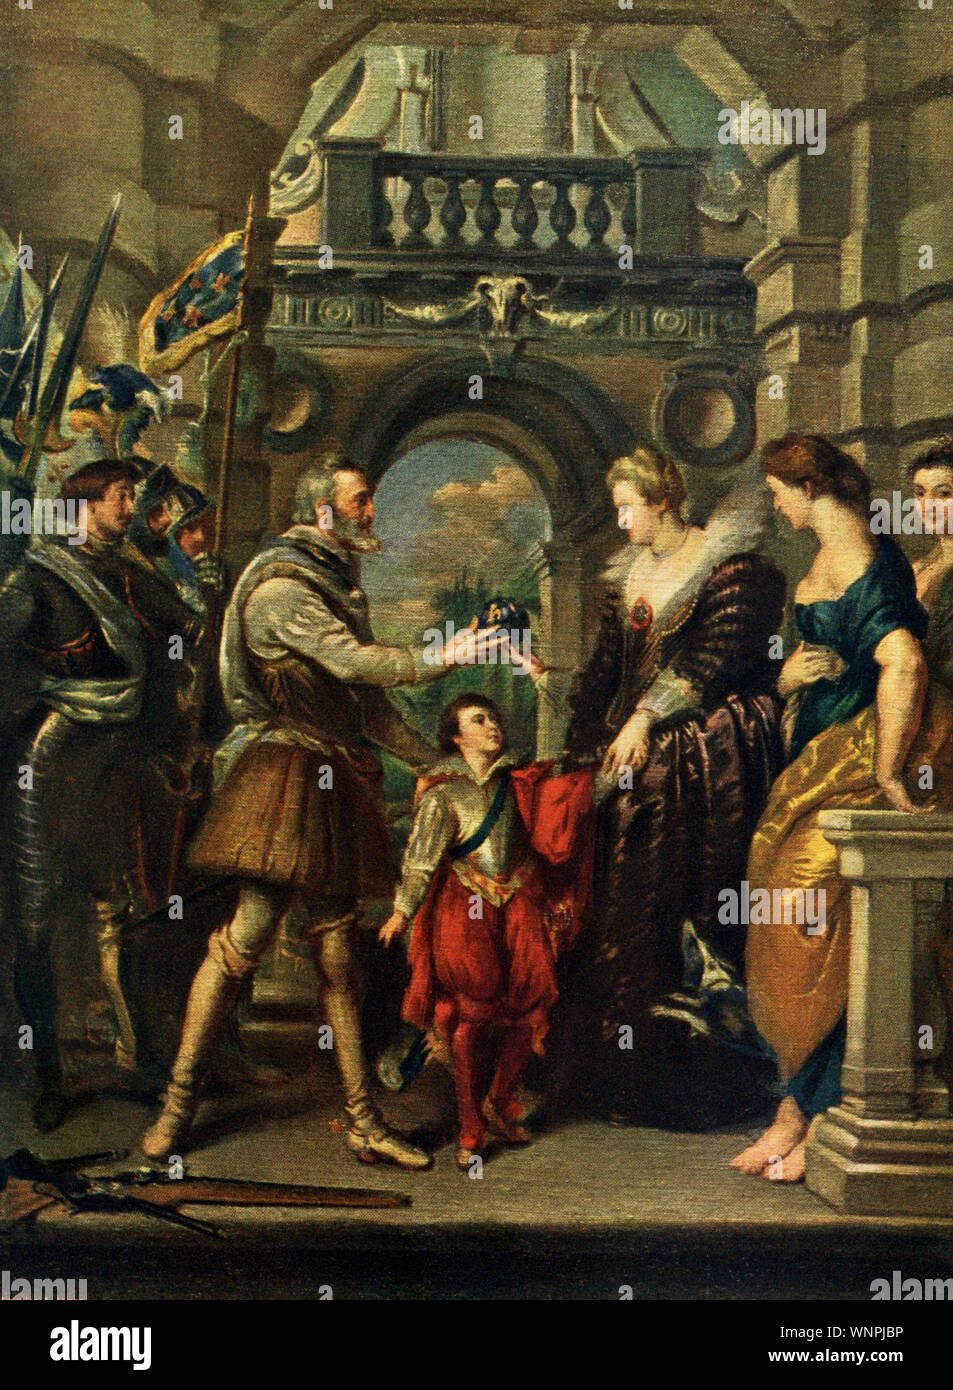 This painting  by P.P. Rubens (1577-1640) shows King Henry IV (died  of France and his wife Maria de’ Medici  (died 1642). Here we see the king just before his departure to the war against Germany. It is housed in the Louvre in Paris. This one is titled Consignment of the Regency and is part of the Henry IV Cycle that was commissioned by Marie de’ Medici. Here, Henry IV entrusts Marie with both the regency of France and the care of the dauphin shortly before his war campaigns and eventual death. To the right of Marie is the figure Prudence. Stock Photo